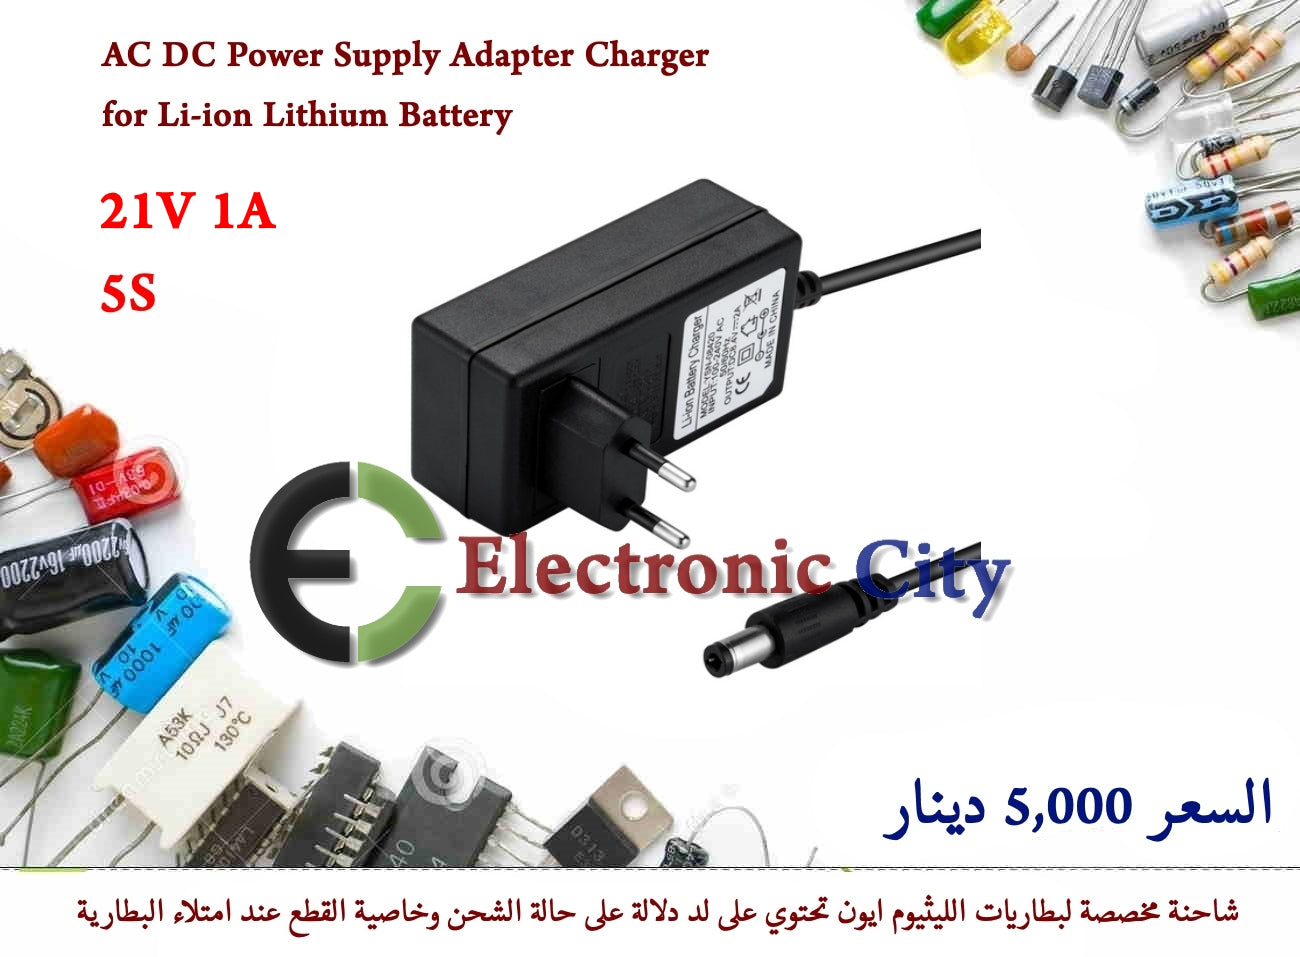 21V 1A AC DC Power Supply Adapter Charger for 5S Li-ion Lithium Battery